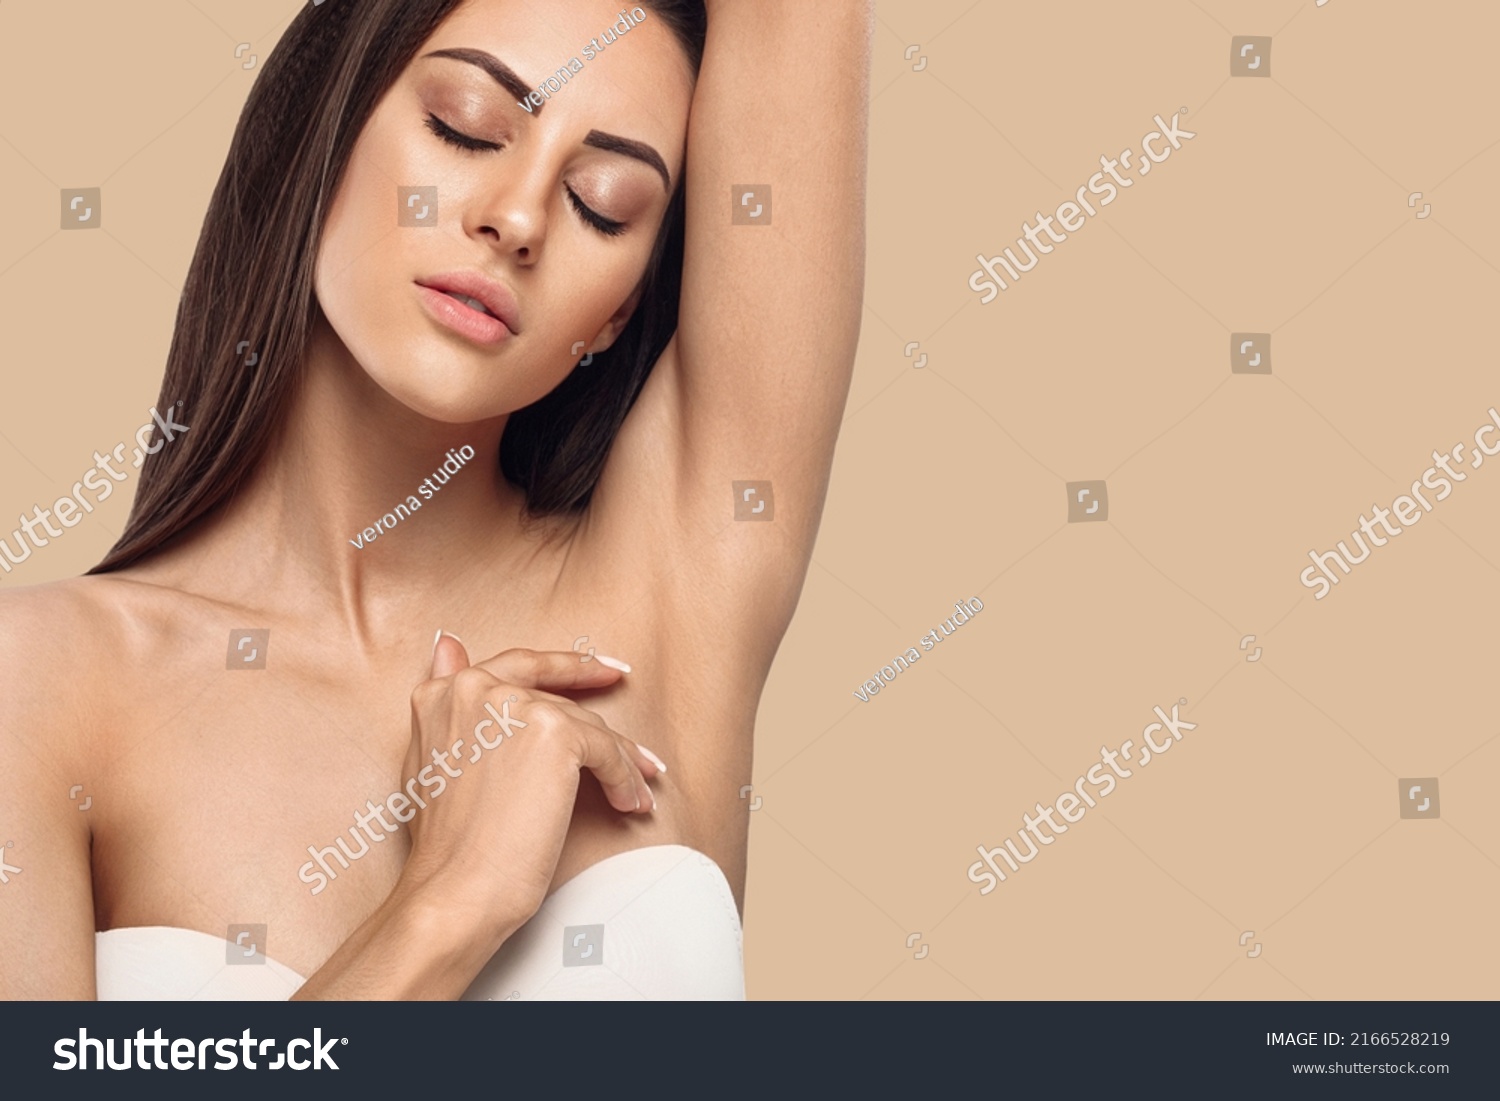 Armpit epilation, lacer hair removal. Young woman holding her arms up and showing clean underarms, depilation smooth clear skin .Beauty portrait #2166528219